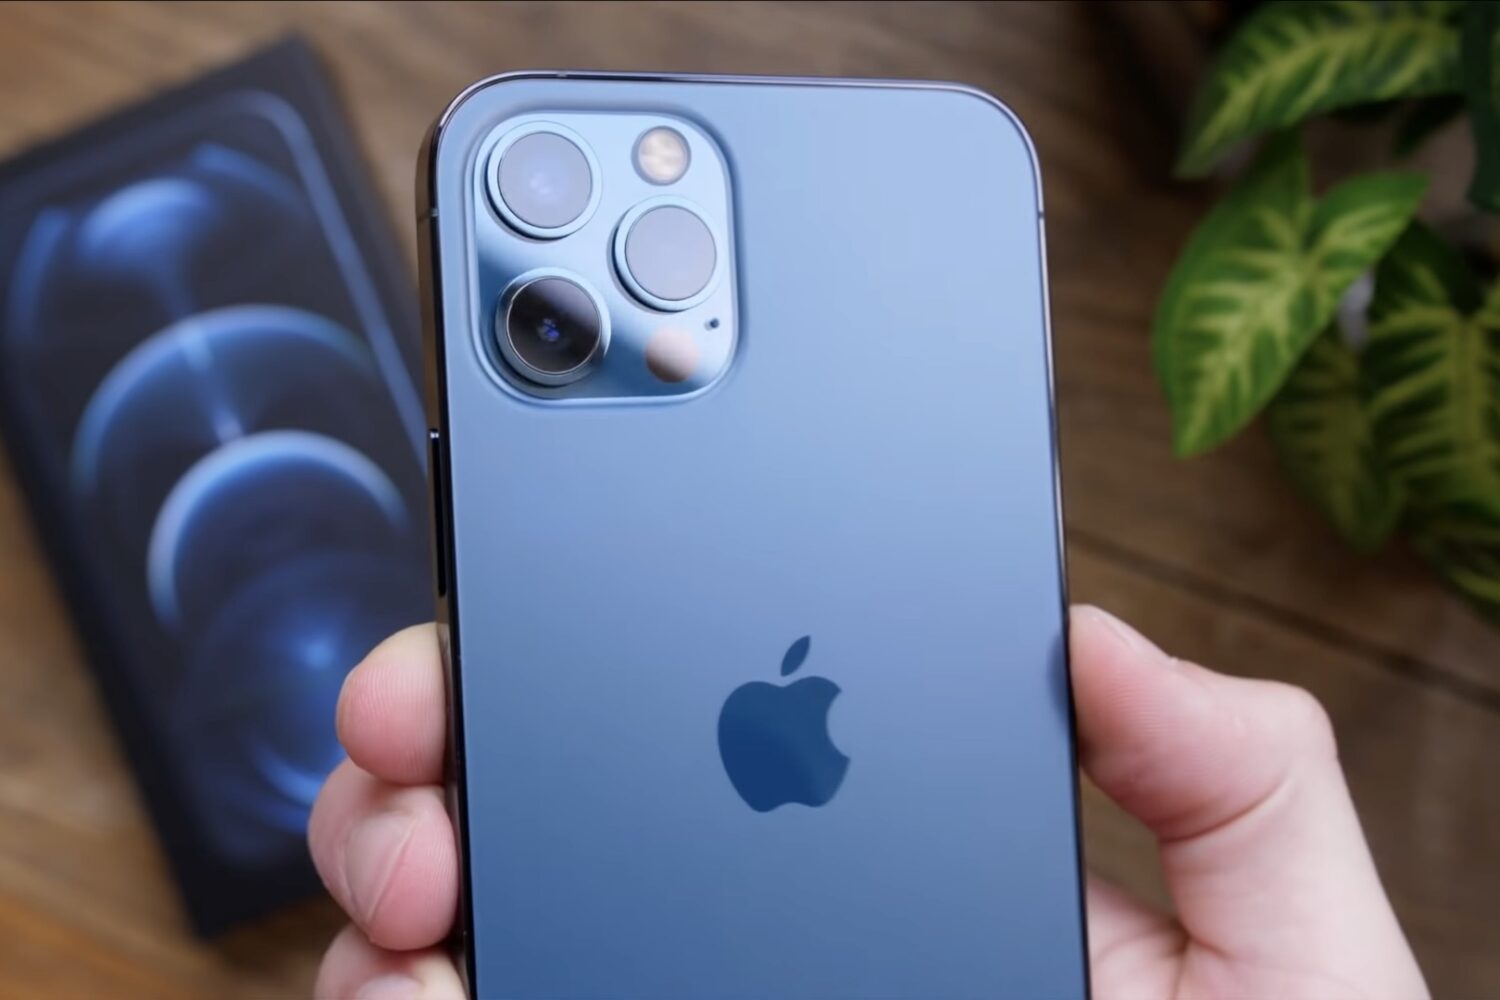 A hand holding an iPhone 12 Pro Max with the rear camera array shown